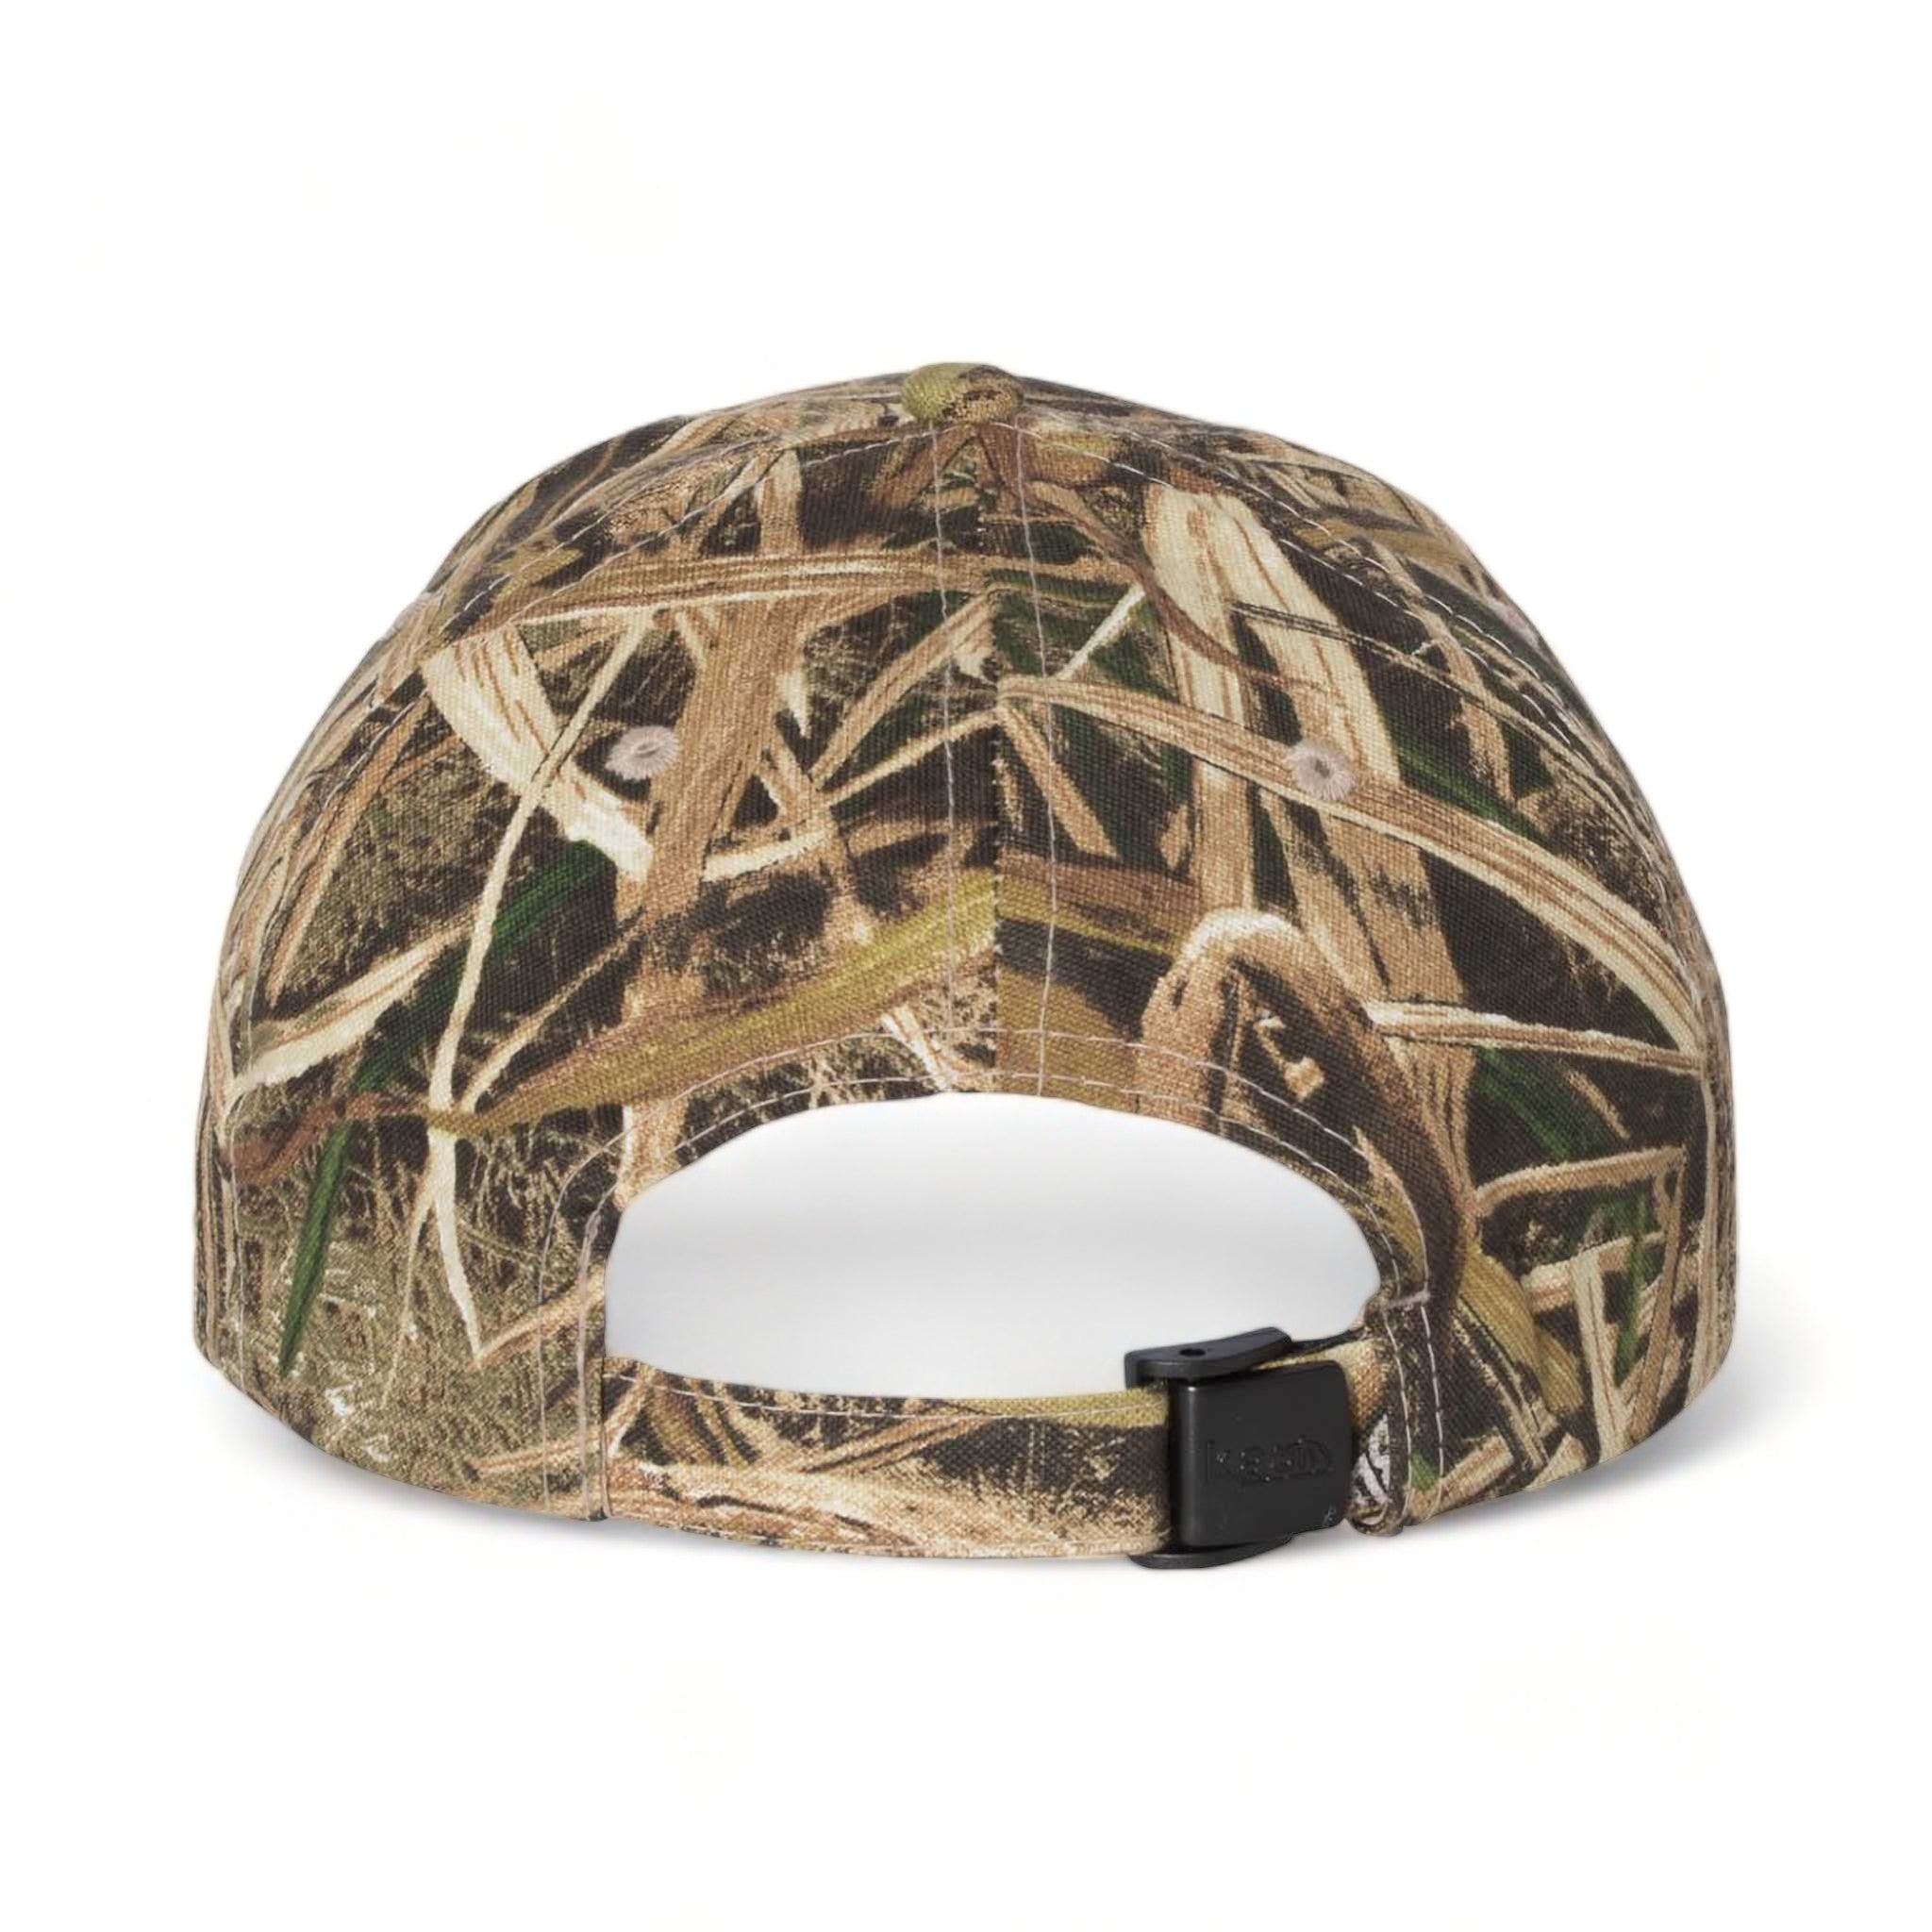 Back view of Kati LC10 custom hat in mossy oak shadow grass blades